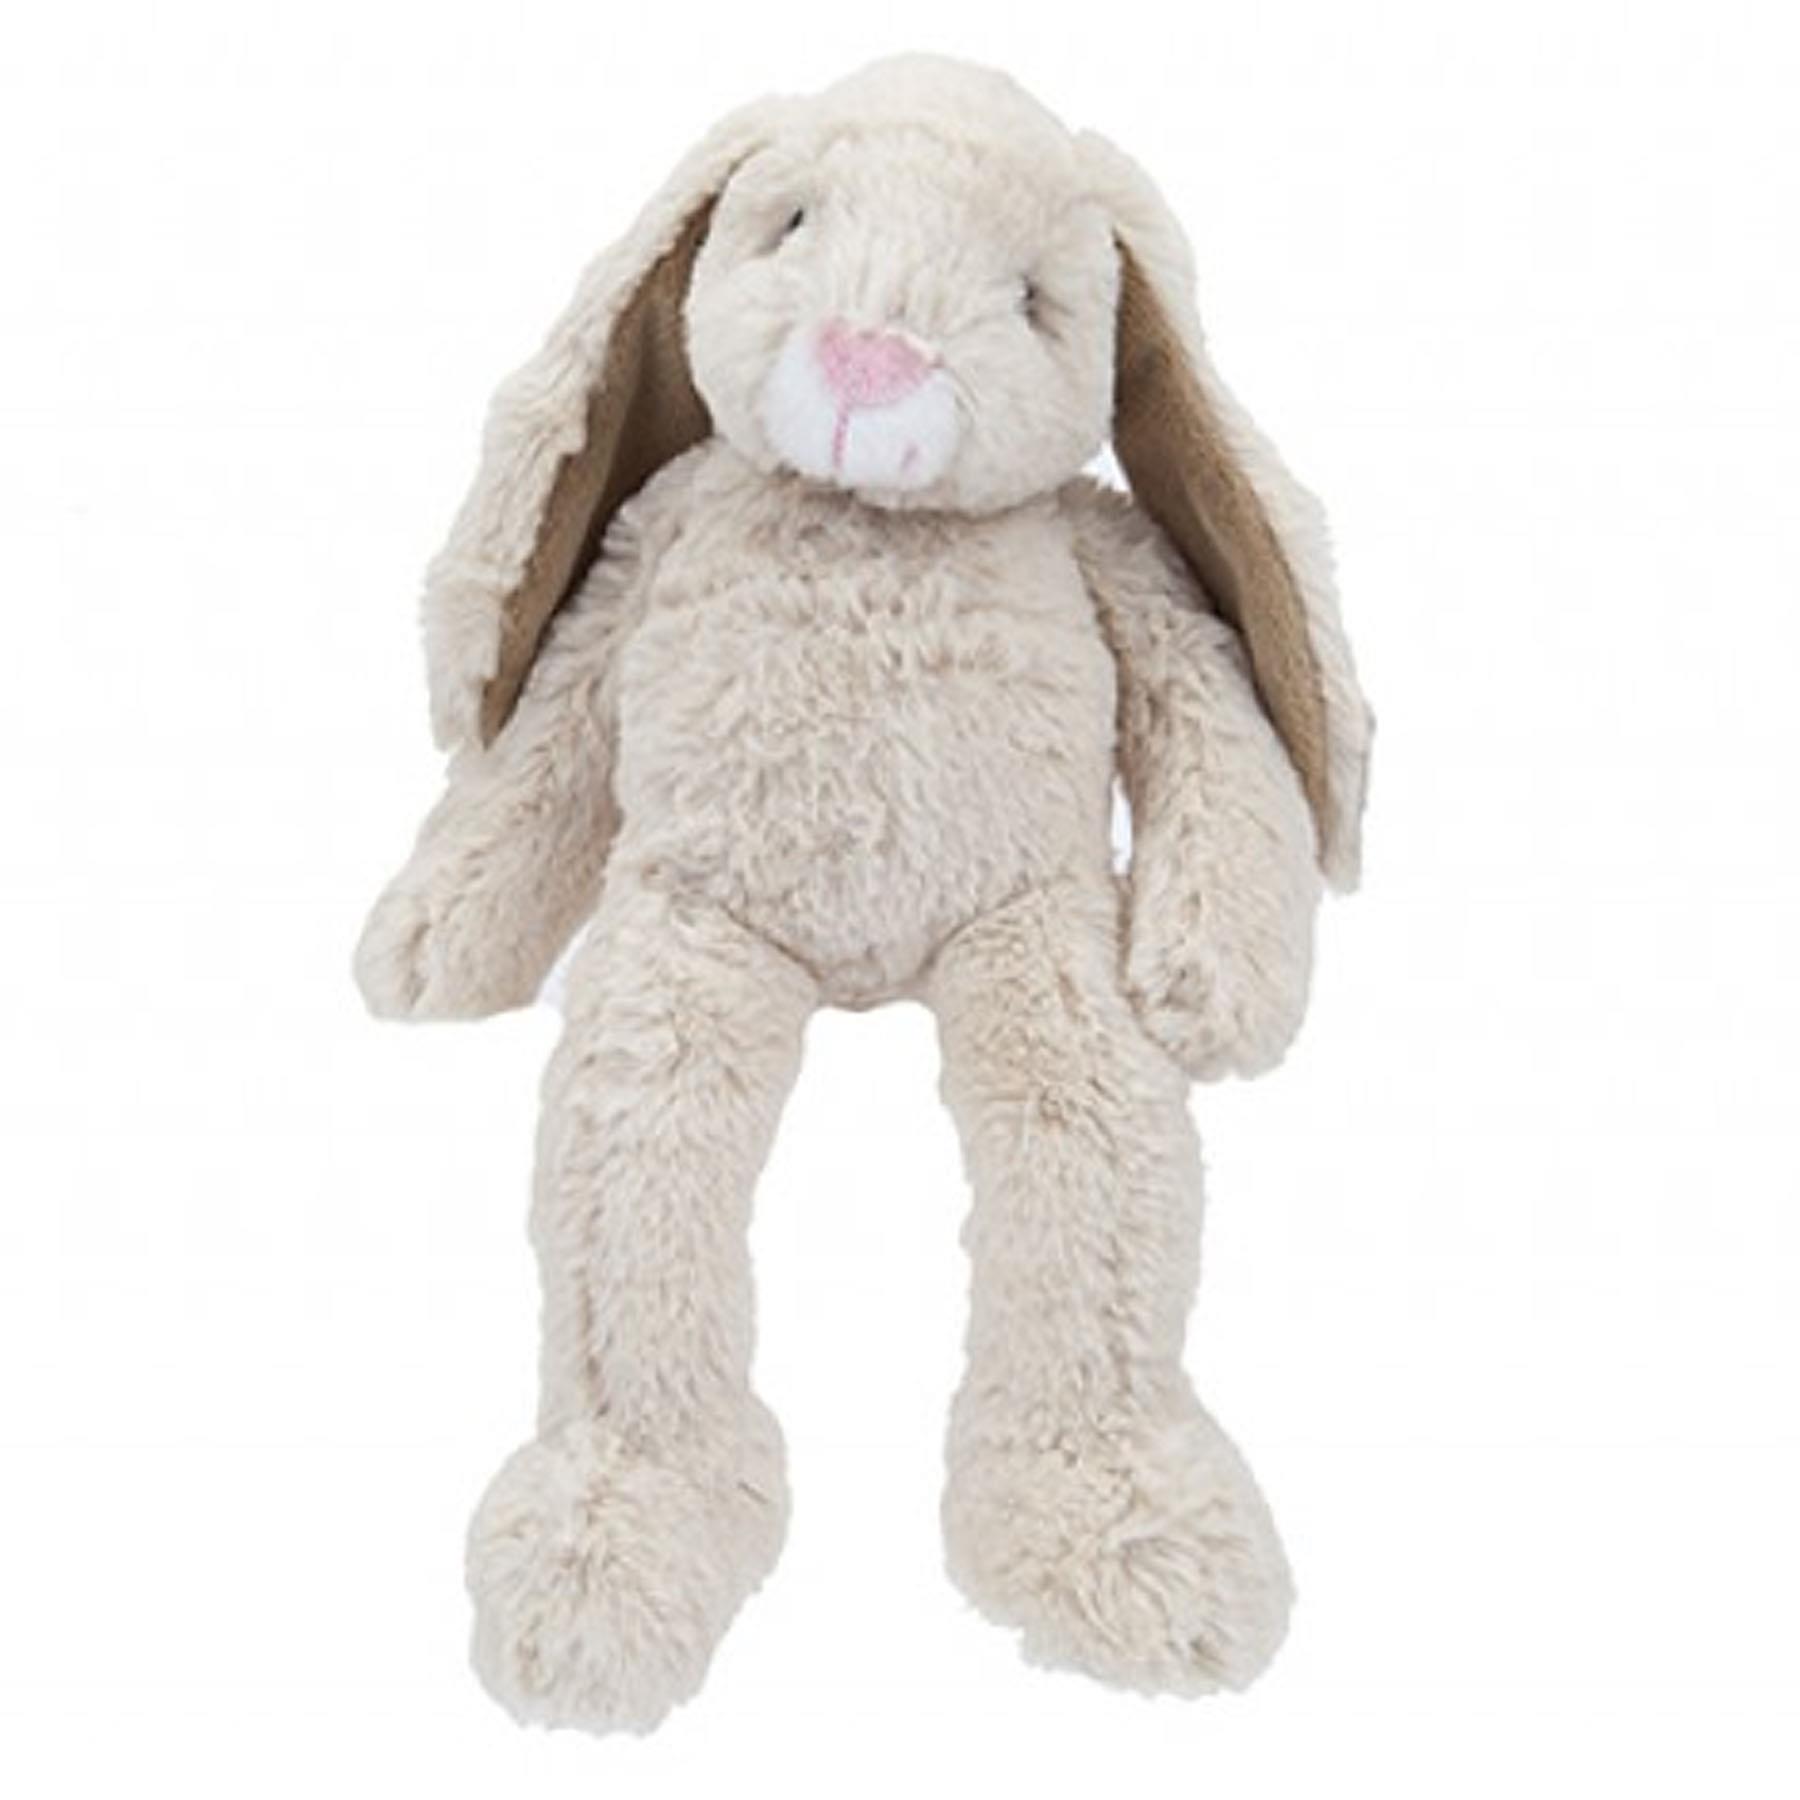 Easter Decorations, Plush Soft Toy Gift - 30cm Flopsy Bunny Rabbit